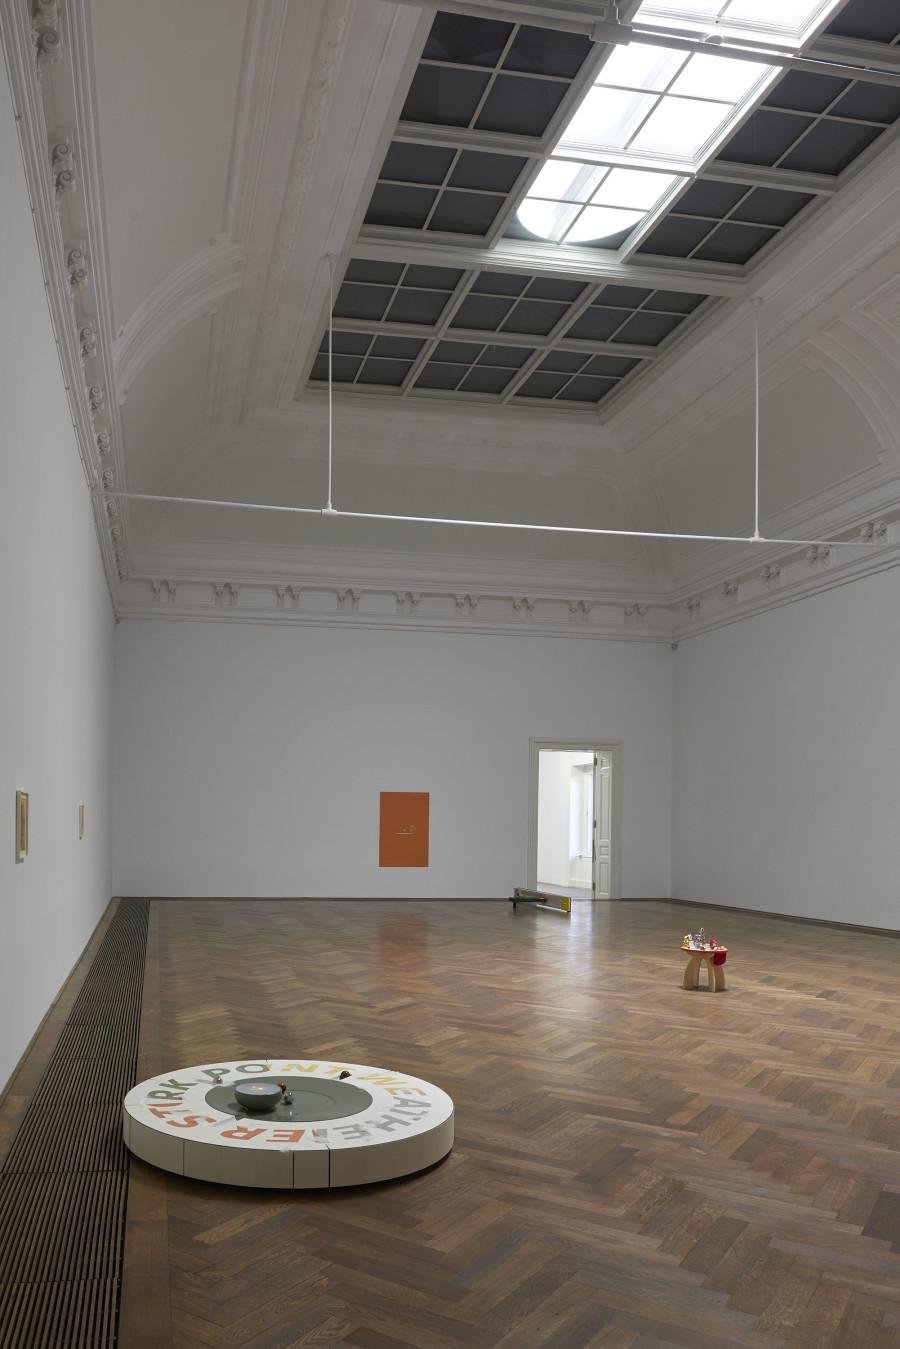 Camille Blatrix, installation view, Standby Mice Station, Kunsthalle Basel, 2020. Photo: Philipp Hänger / Kunsthalle Basel. Courtesy of the artist; Galerie Balice Hertling, Paris, and Andrew Kreps Gallery, New York